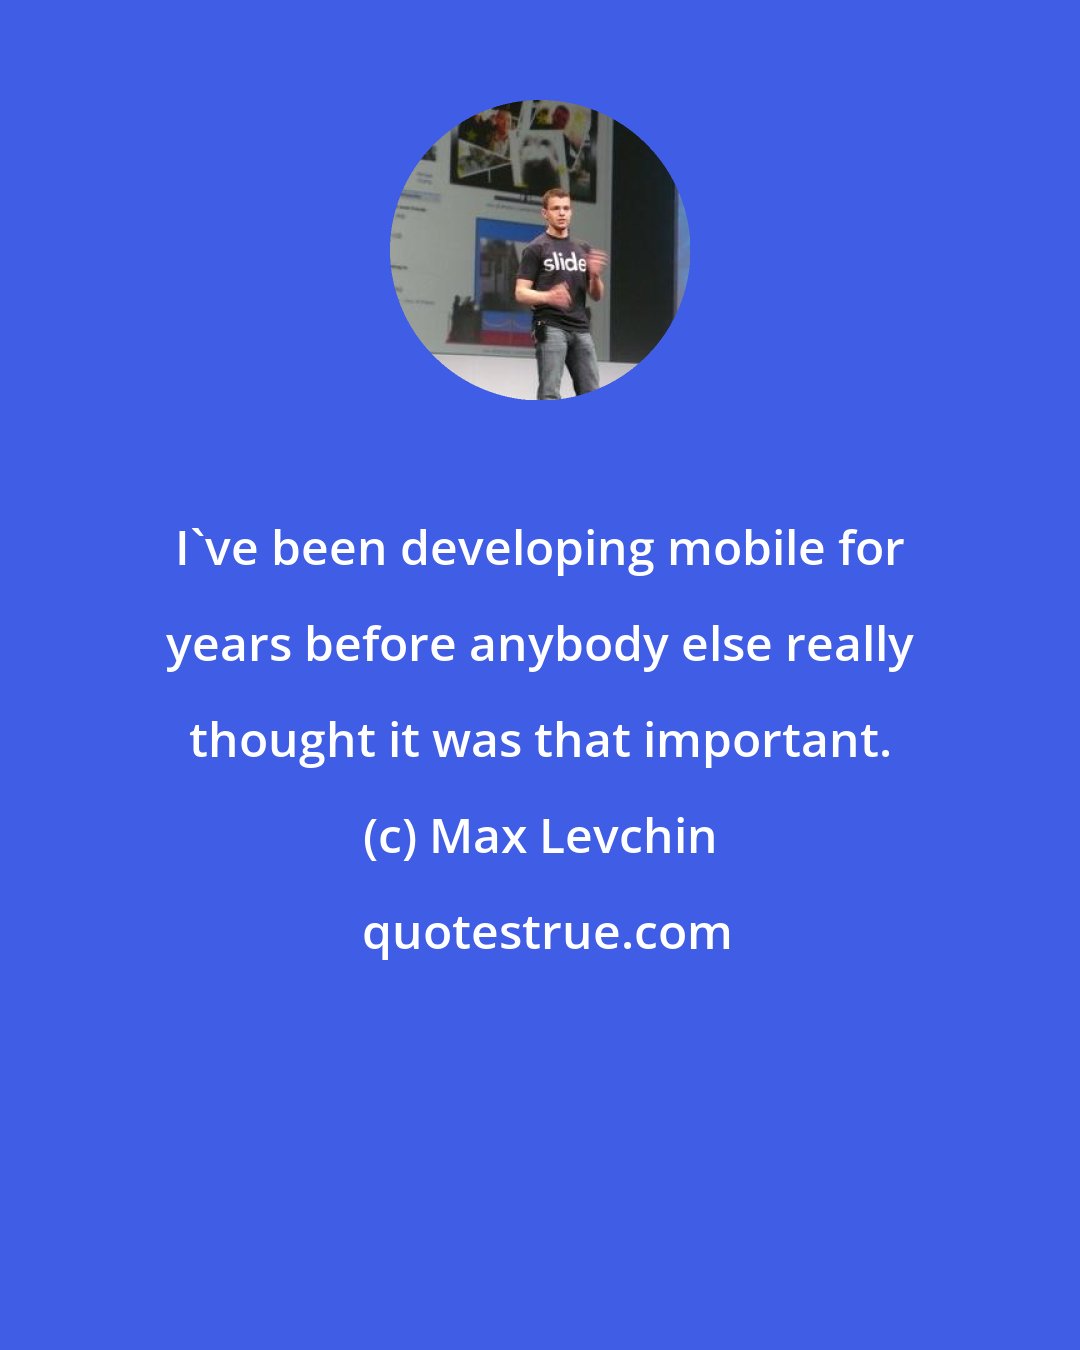 Max Levchin: I've been developing mobile for years before anybody else really thought it was that important.